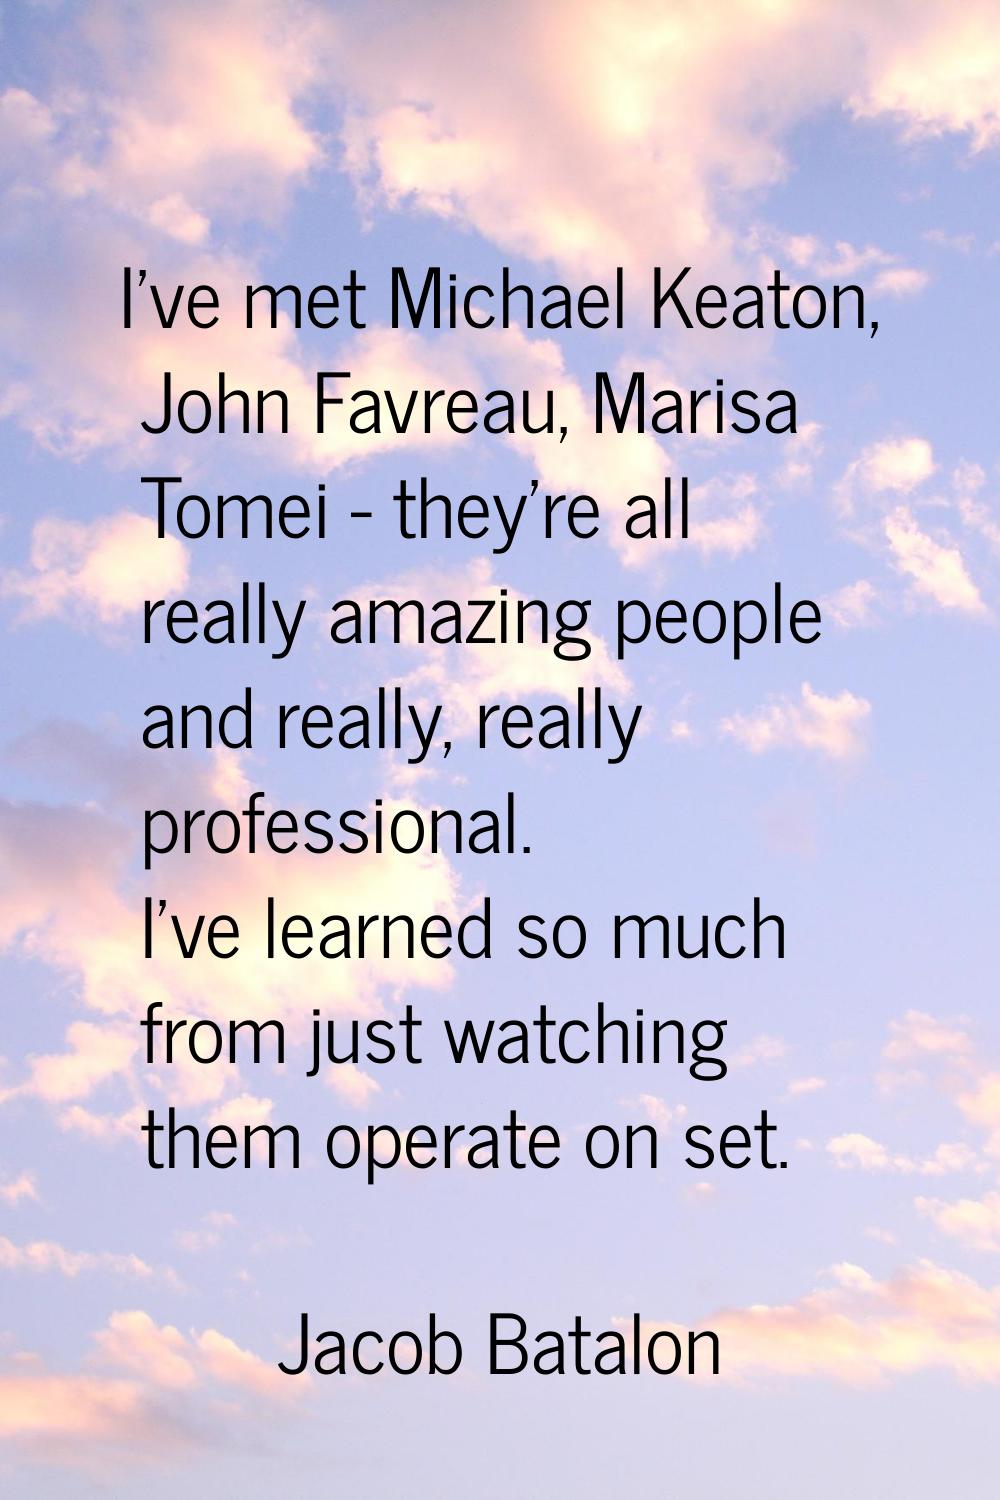 I've met Michael Keaton, John Favreau, Marisa Tomei - they're all really amazing people and really,